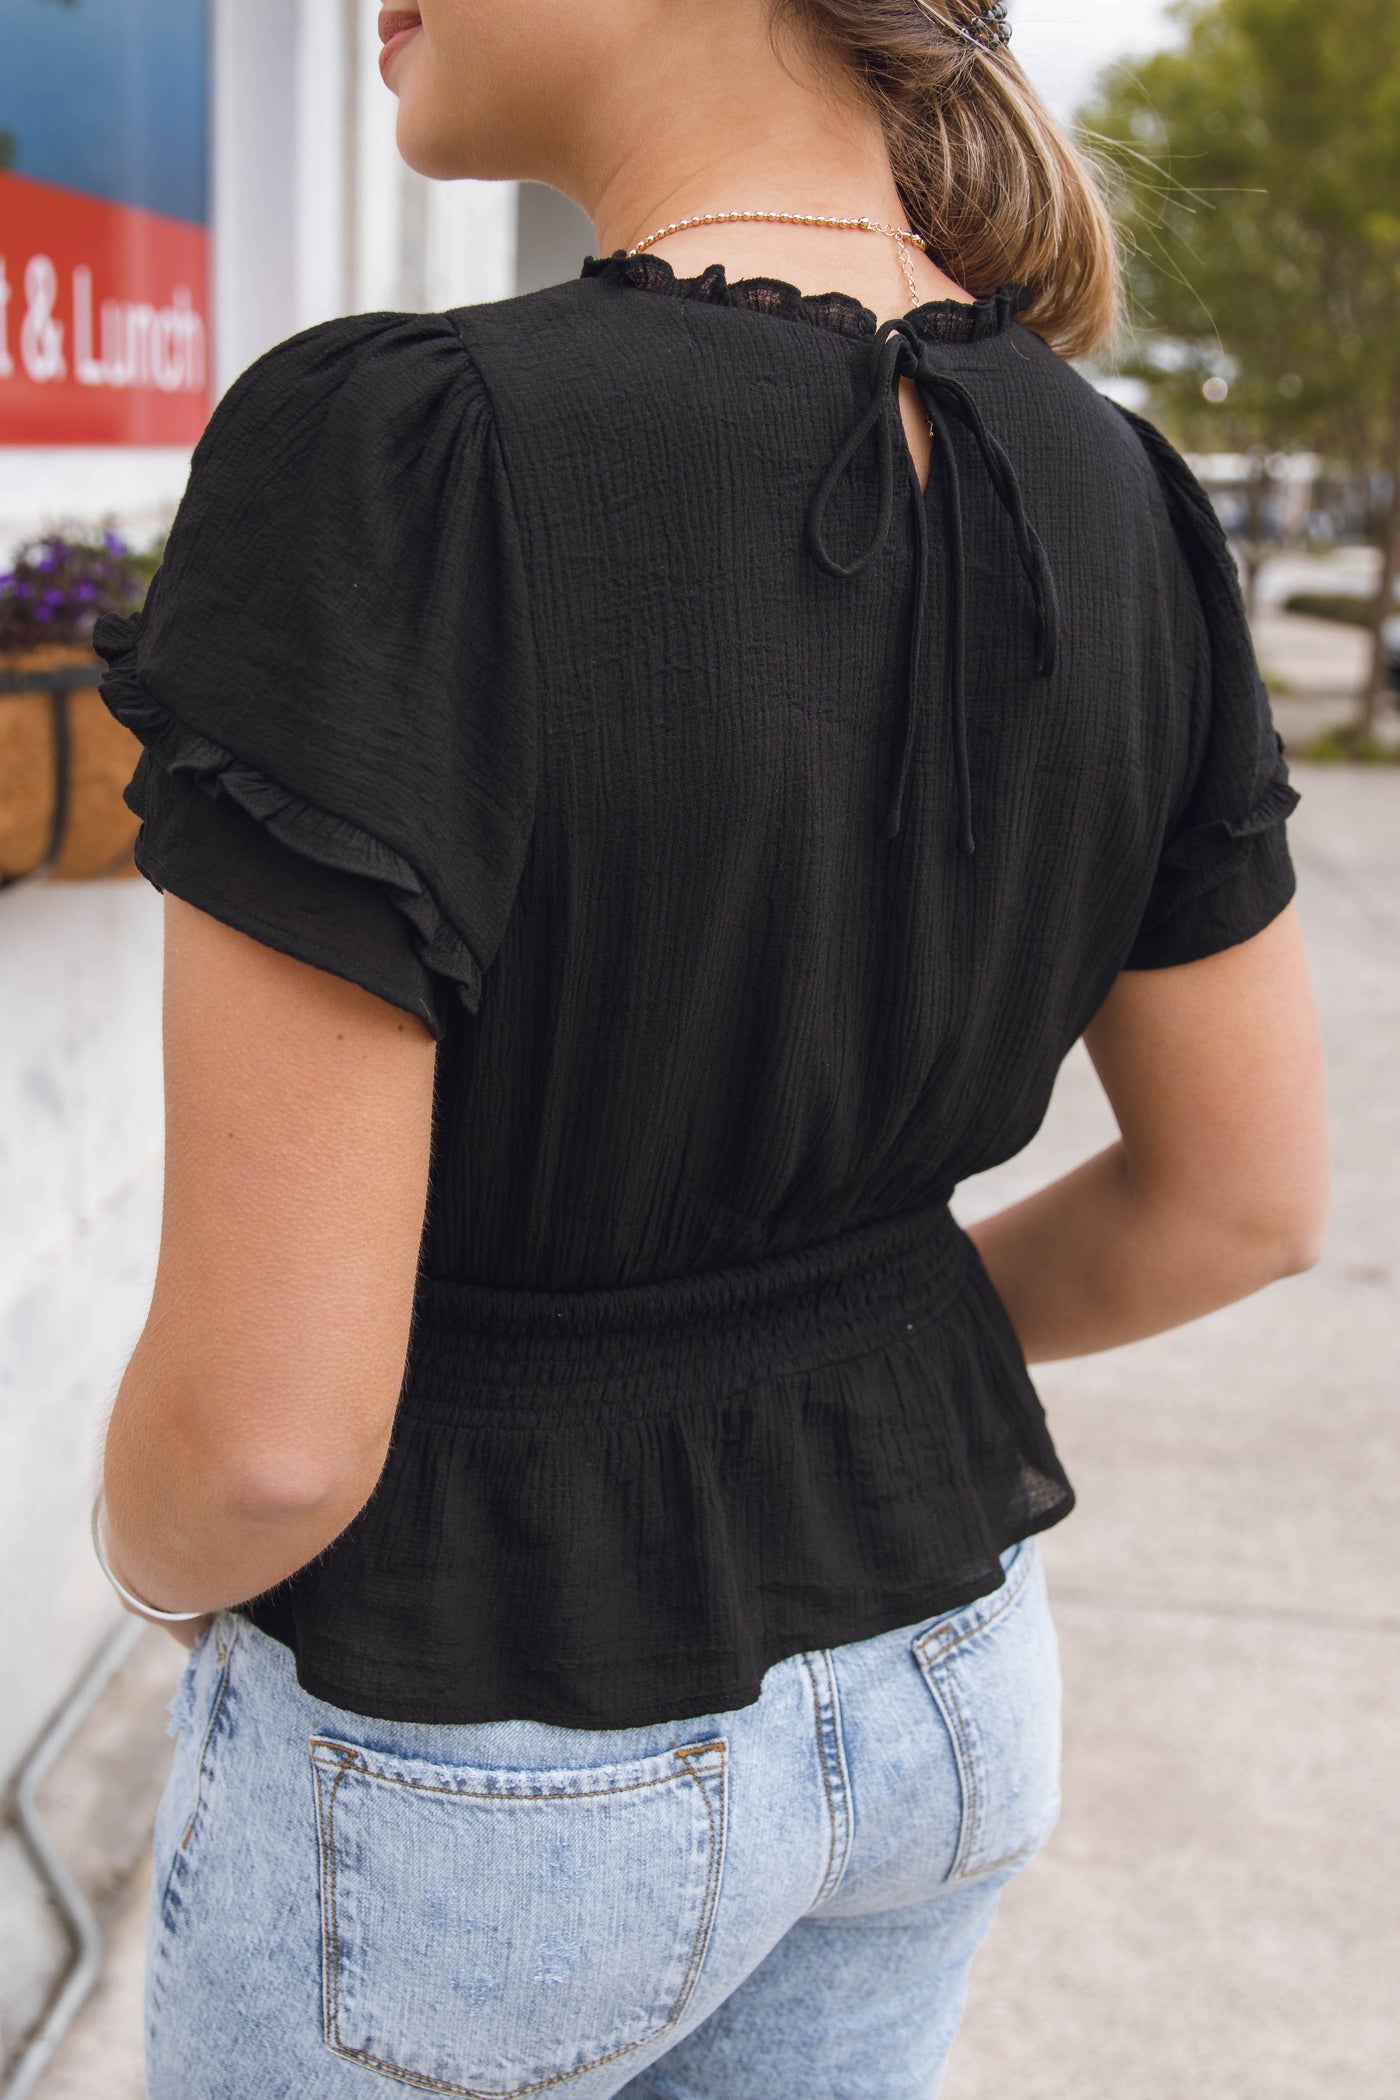 Black Peplum Blouse- Going Out Top- Black Ruffle Sleeve Top